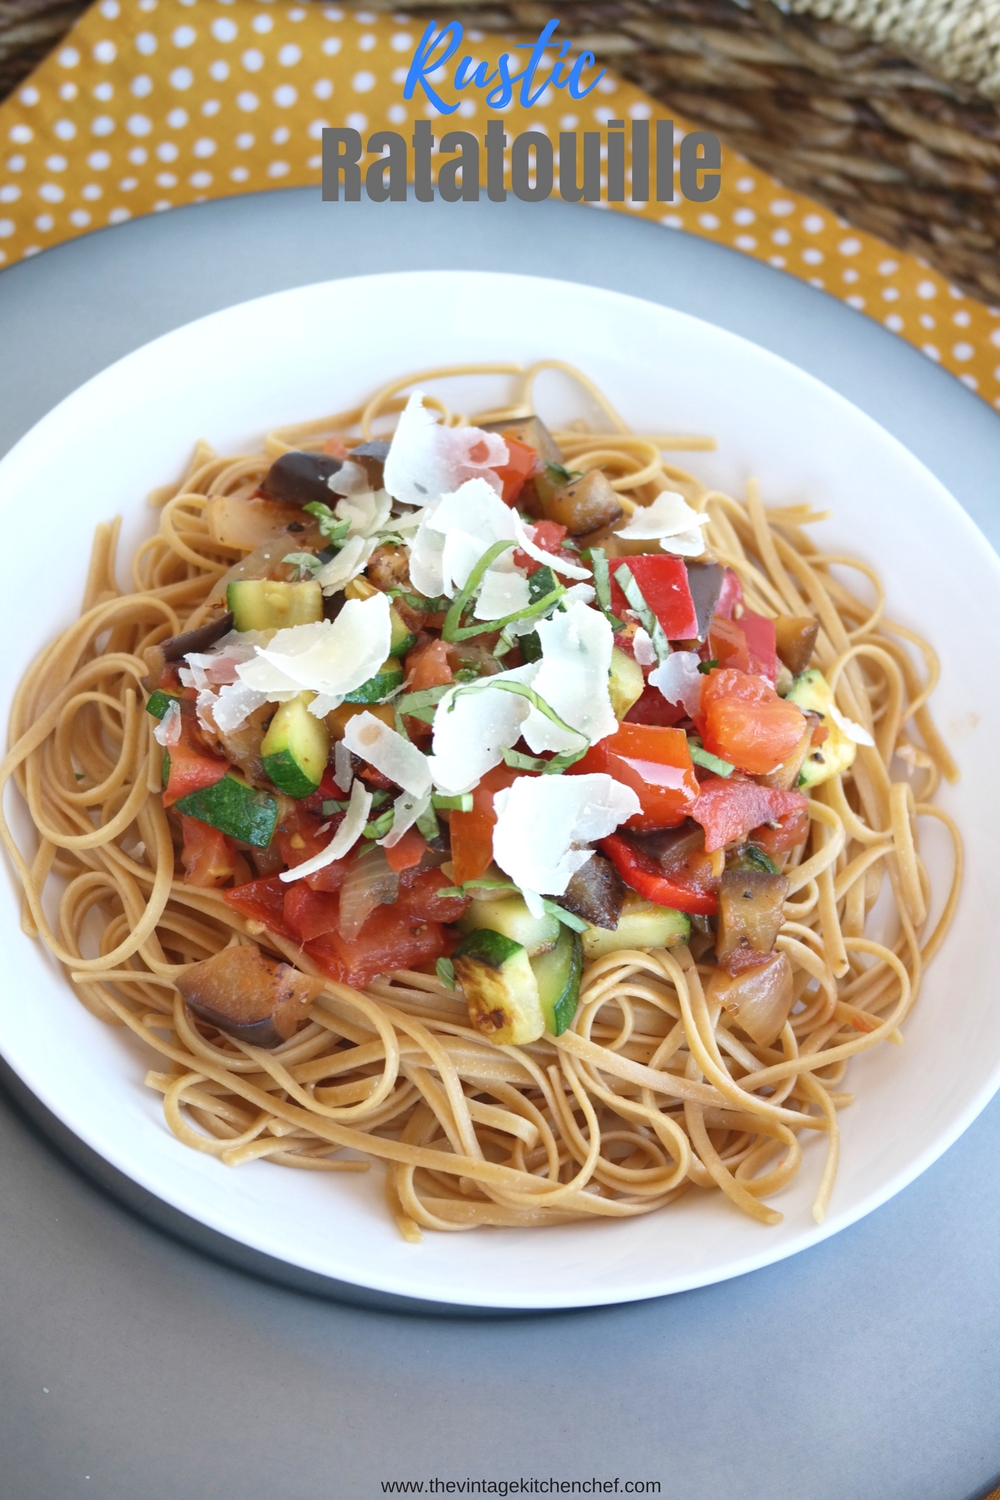 Rustic Ratatouille is a hearty, savory French Provencal dish loaded with tasty veggies and lots of flavor. This dish is served over whole wheat pasta. YUM! 